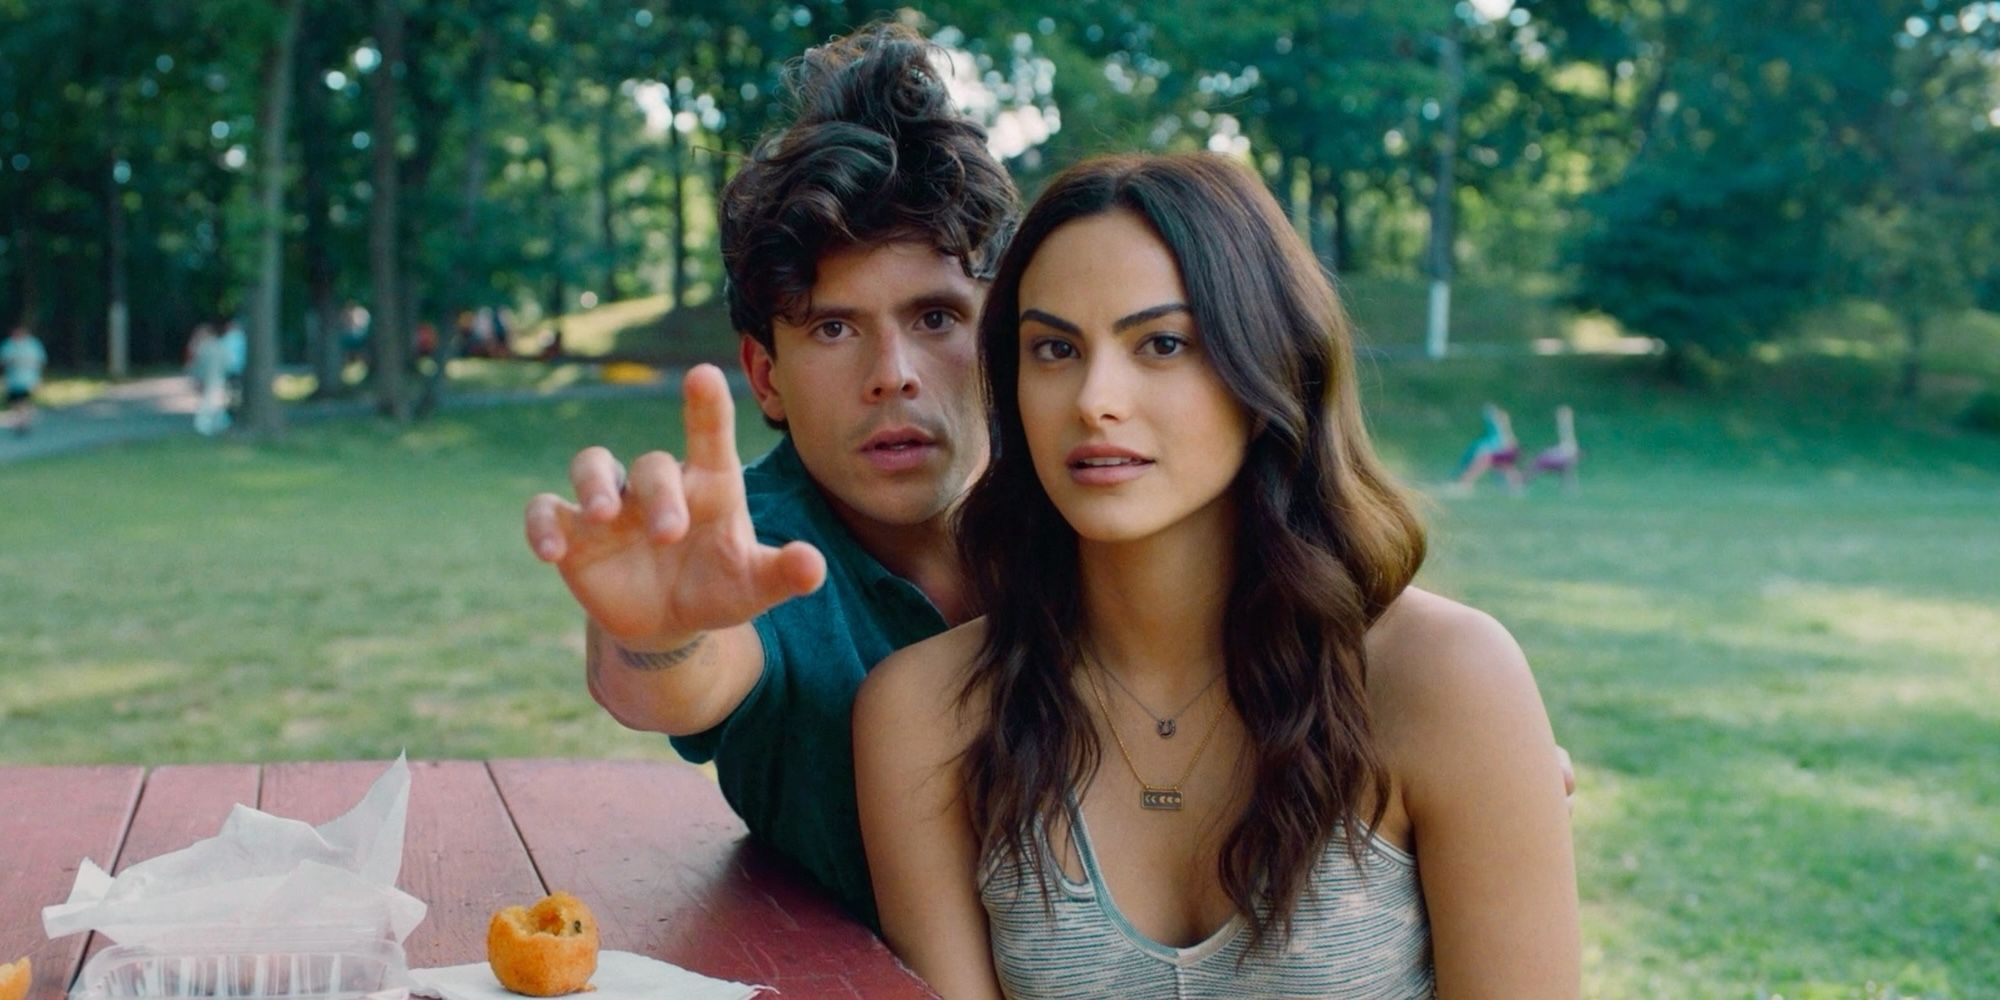 Rudy Mancuso shows Camila Mendes the way in Musica